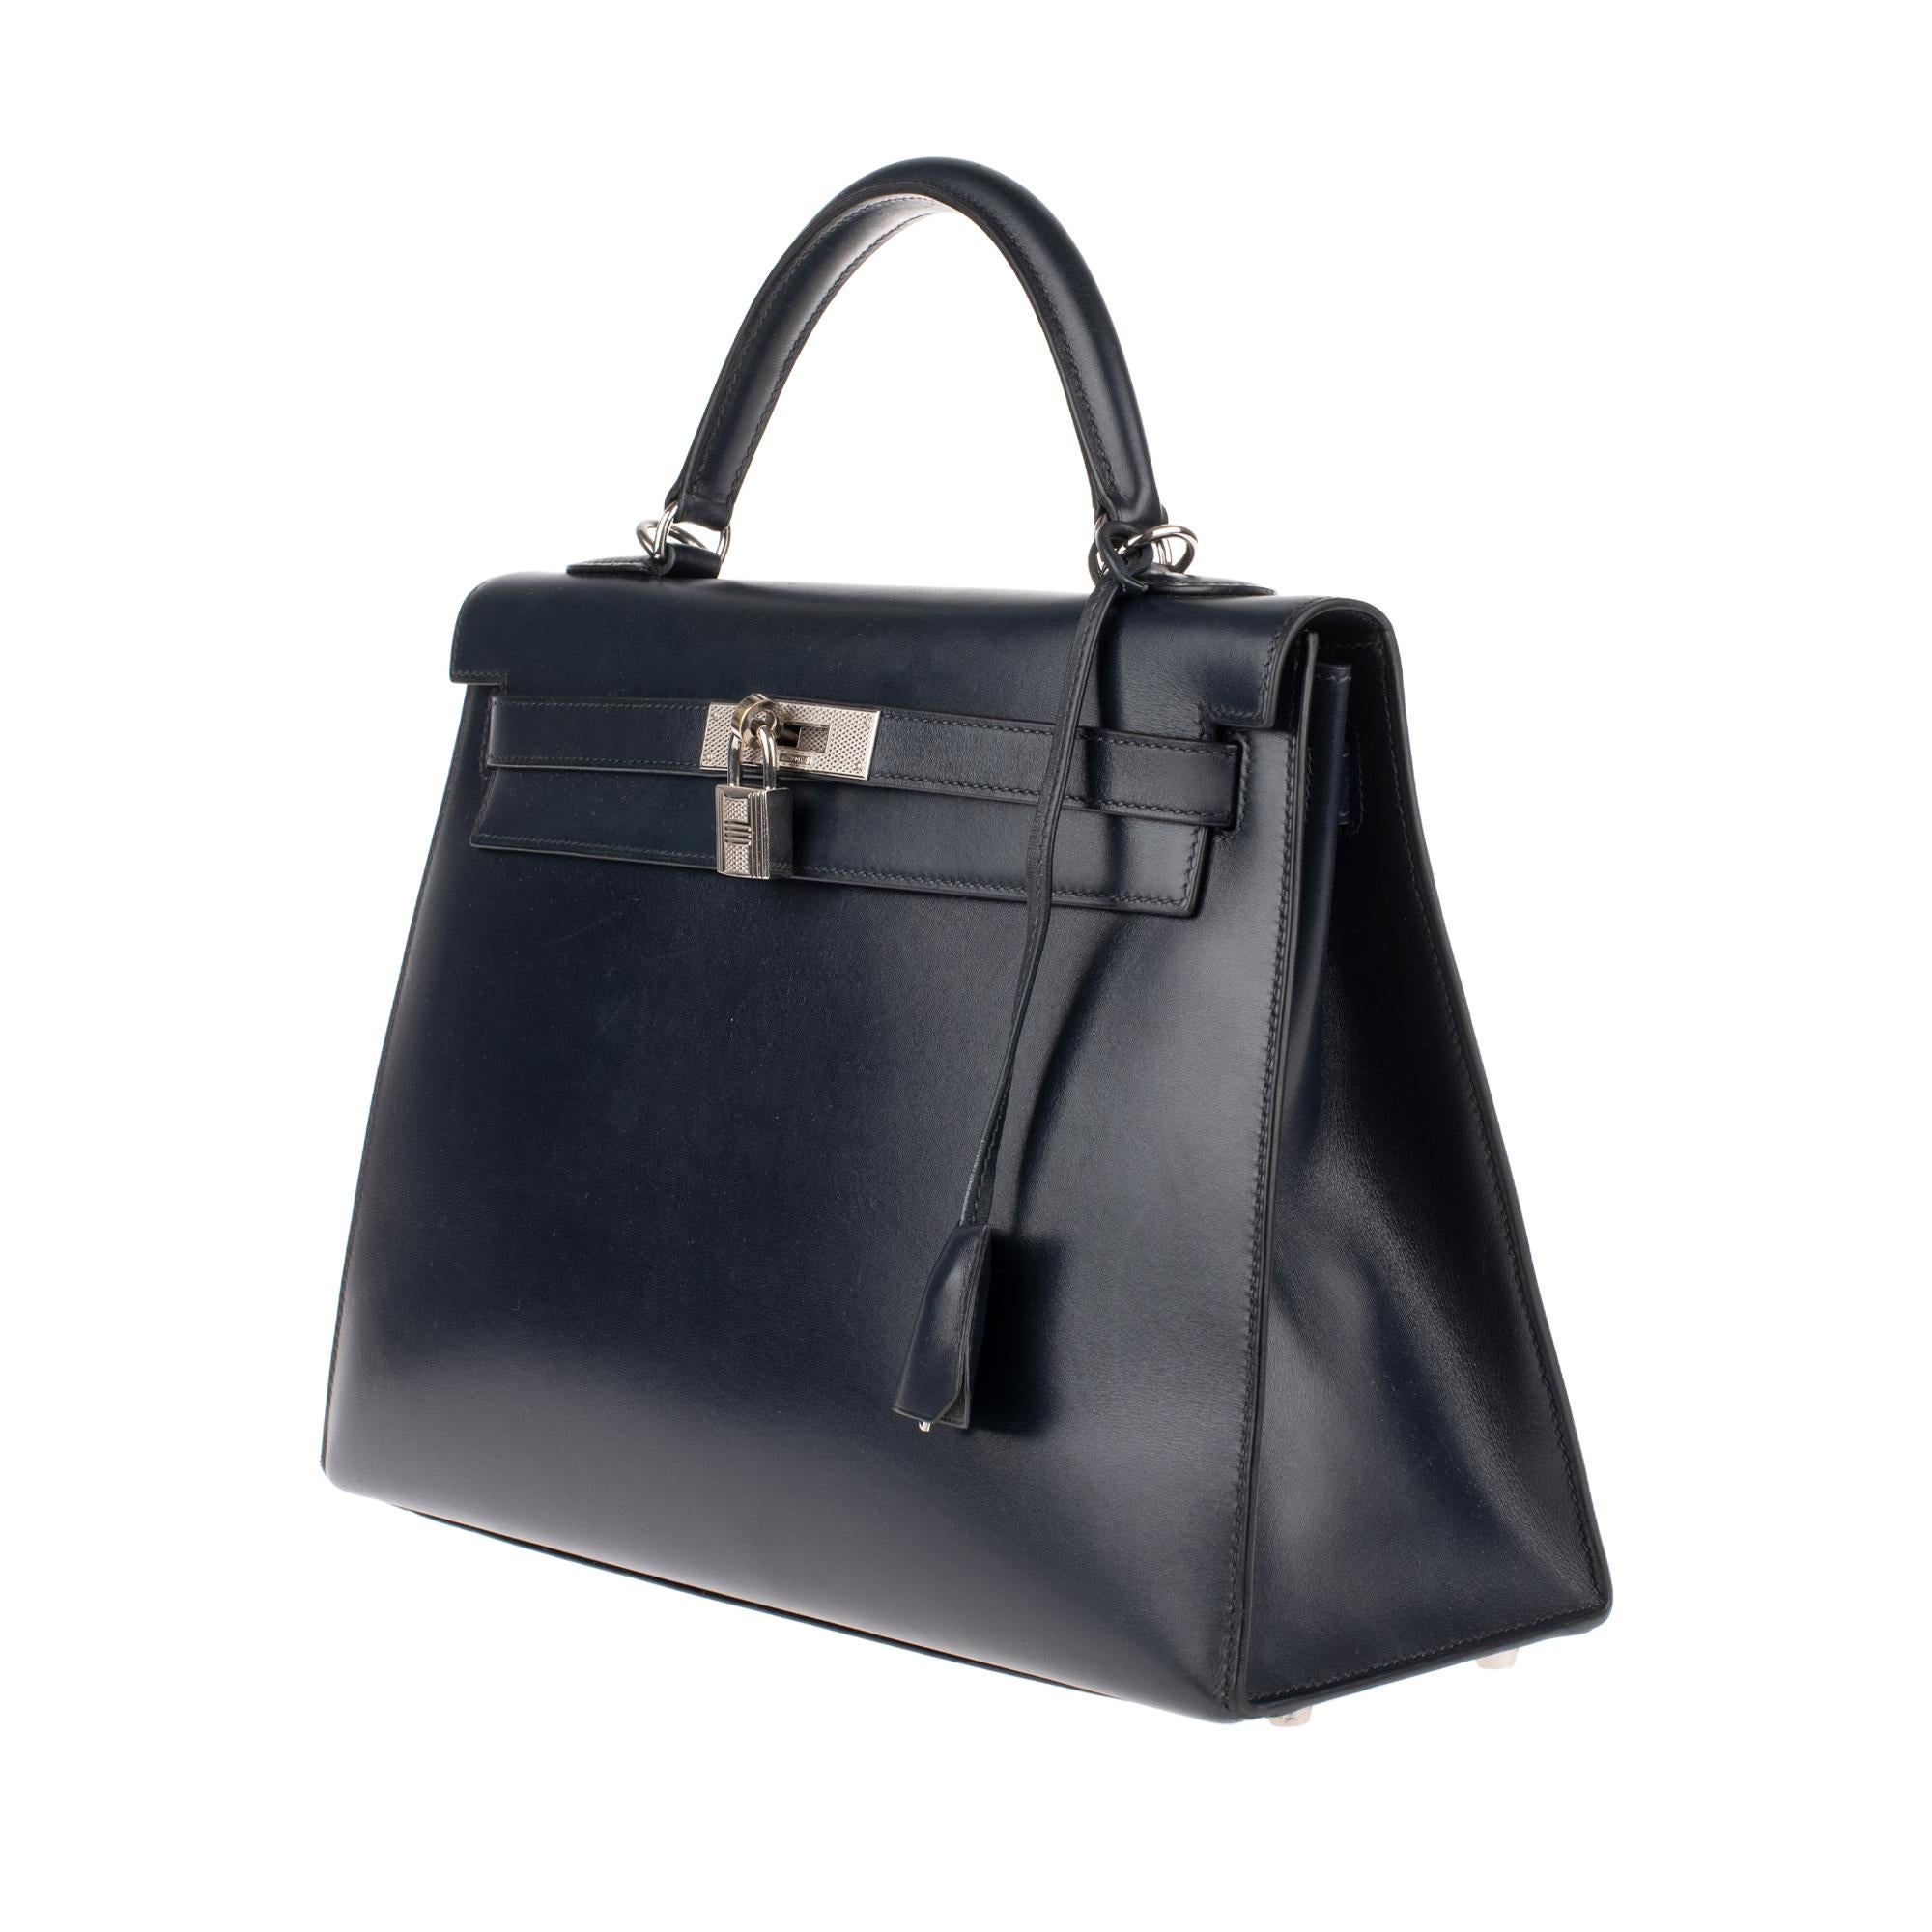 Stunning Gem and very rare collector piece very limited edition) : Hermes Kelly handbag 32 navy blue calfskin box leather , palladium silver metal trim, simple handle in navy leather, Shoulder strap in navy leather box for carrying hand or